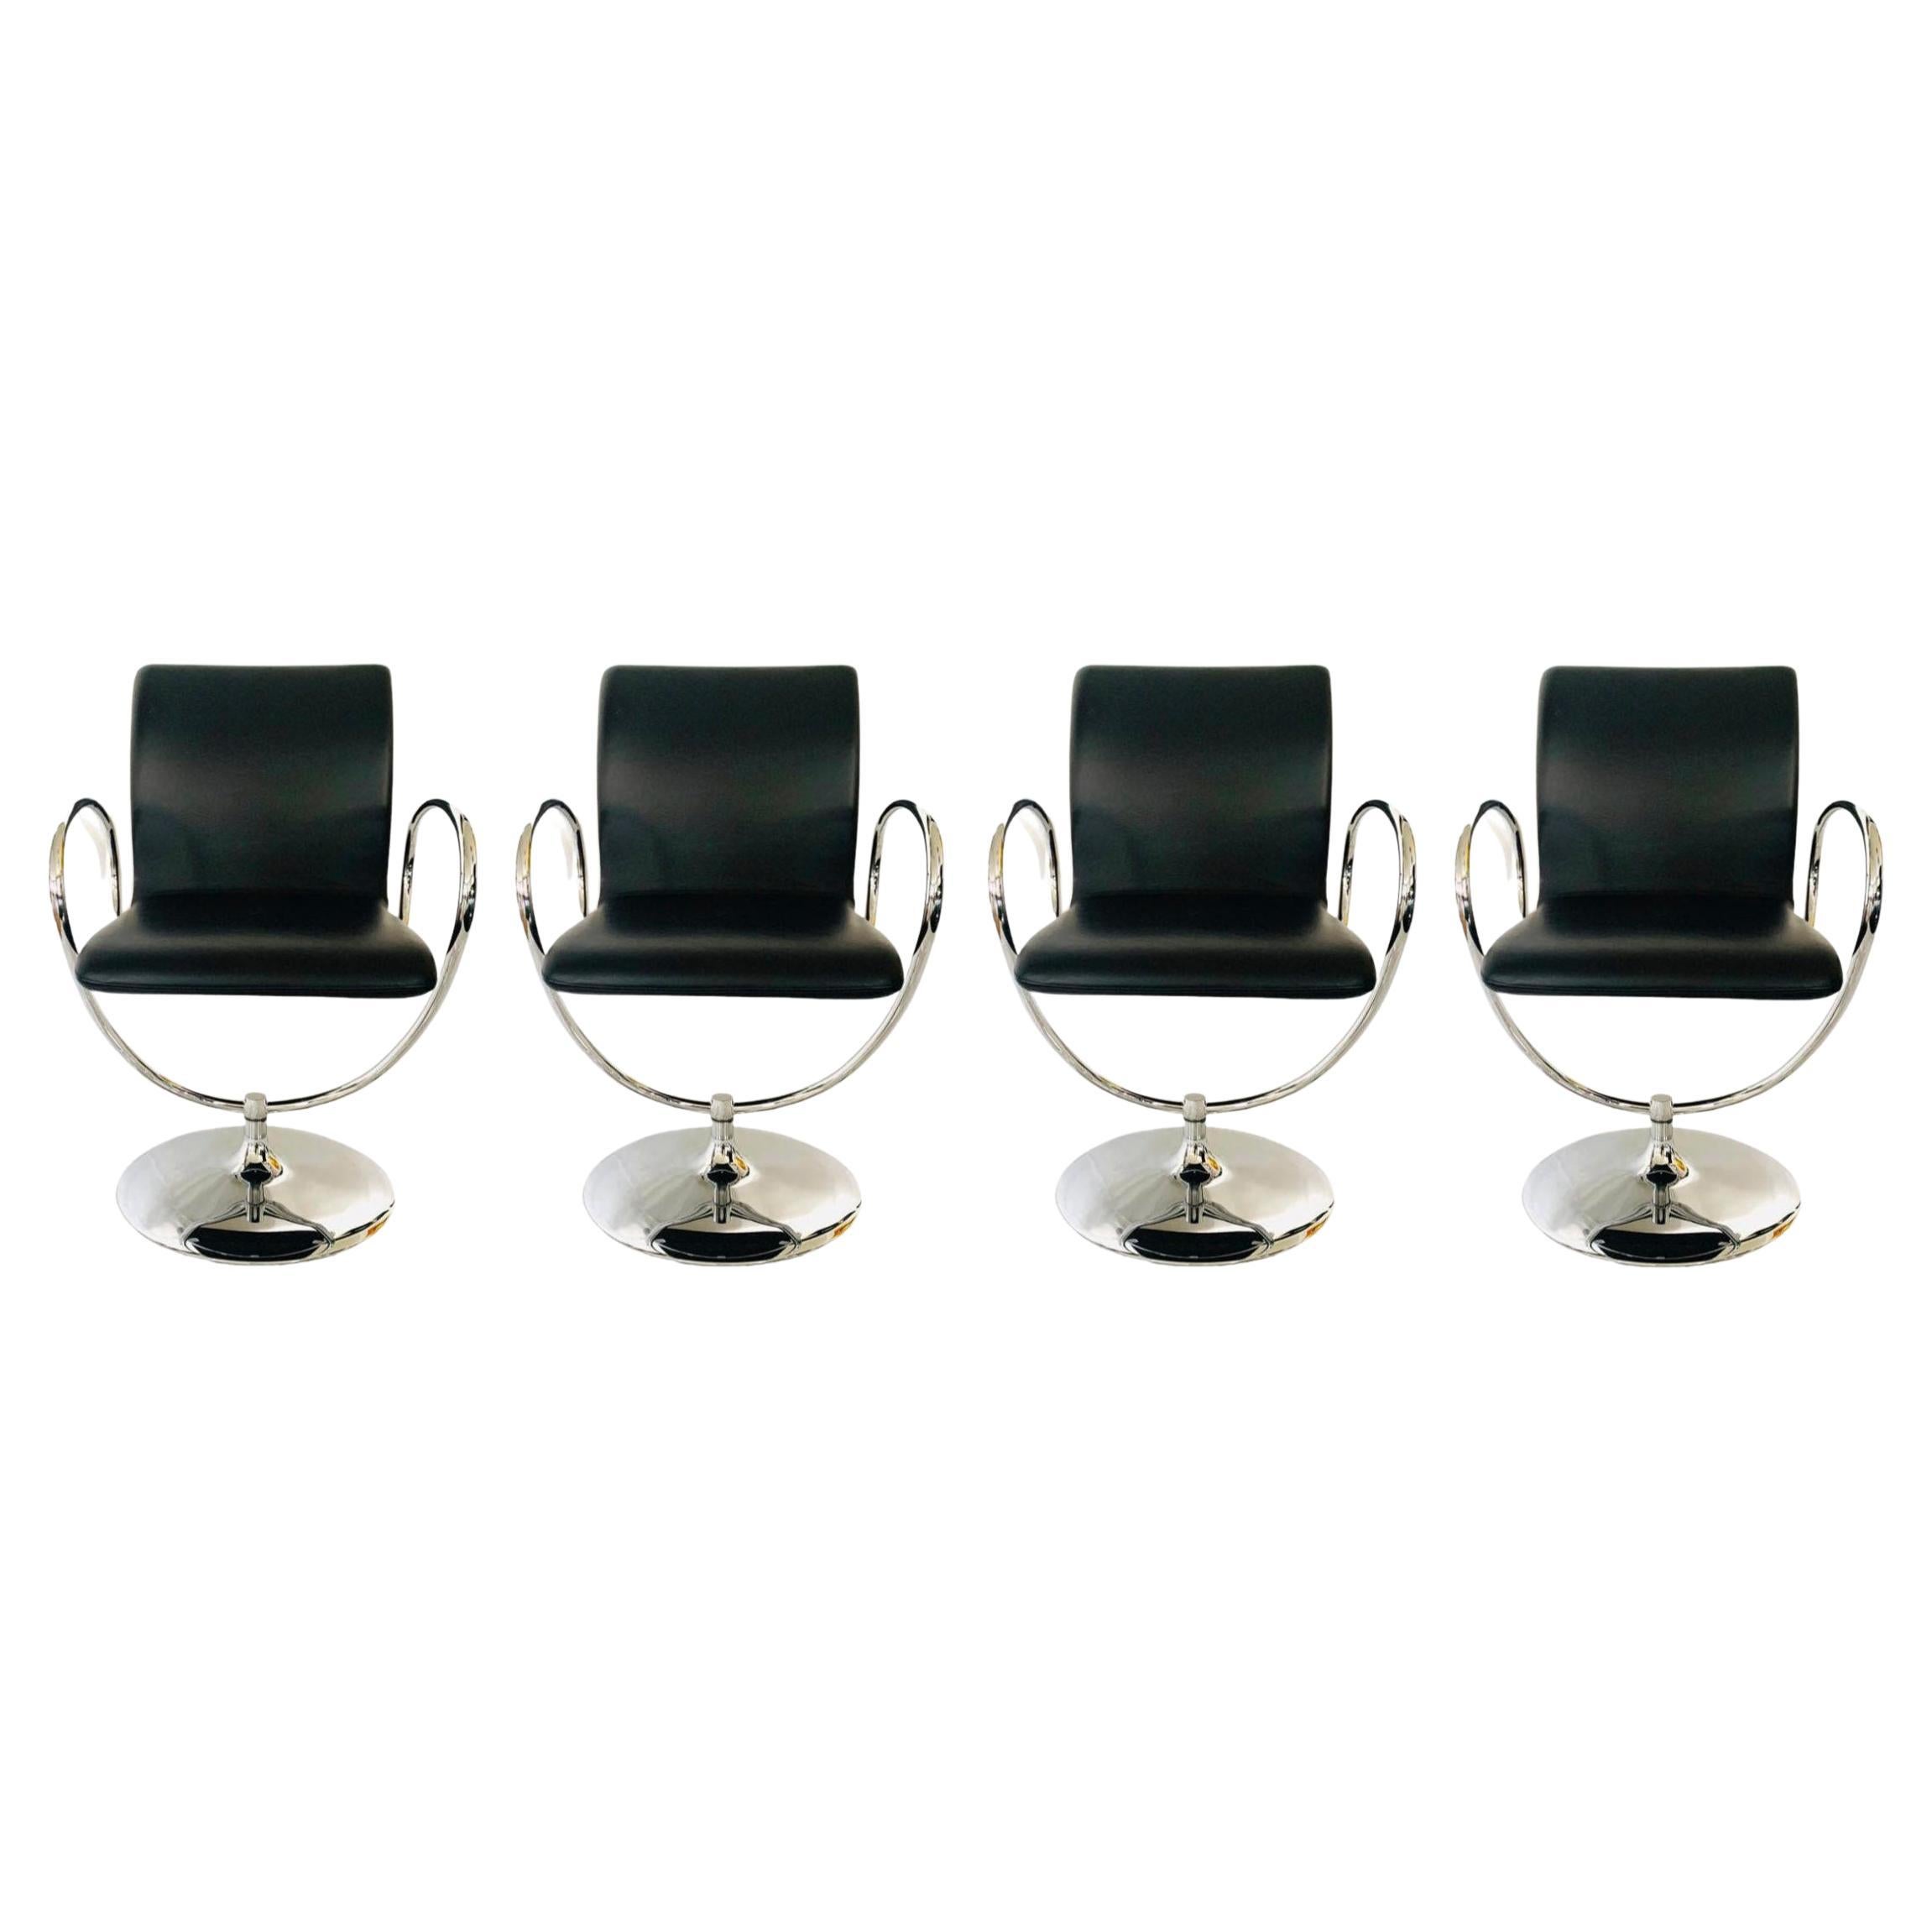 Tonon Swivel Chair Dining Room Living Room Black Leather and stainless steel en vente